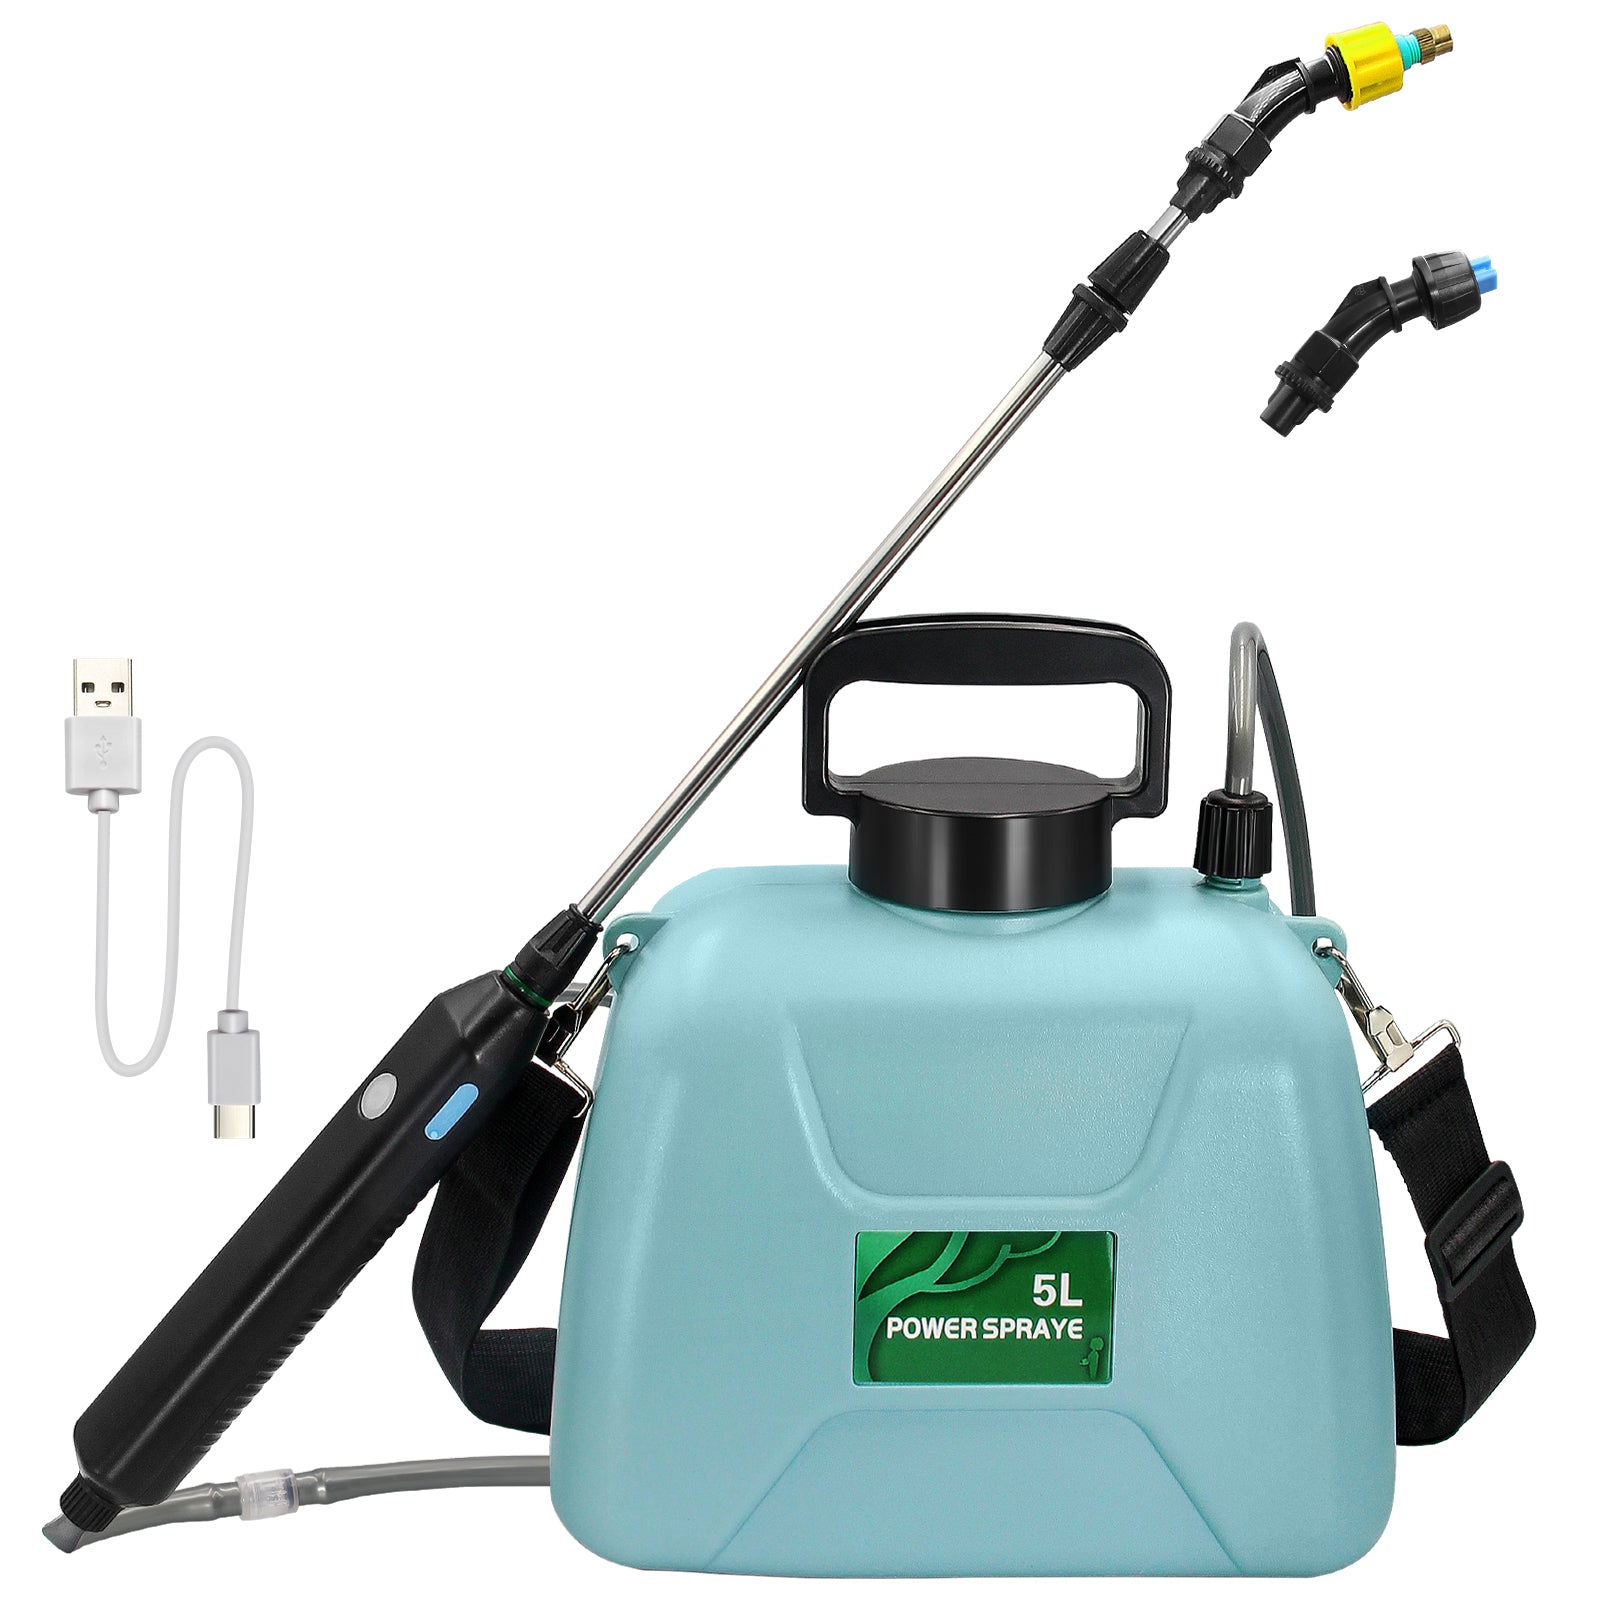 Battery Powered Sprayer 1.35 Gallon/5L with USB Rechargeable Handle (Blue）